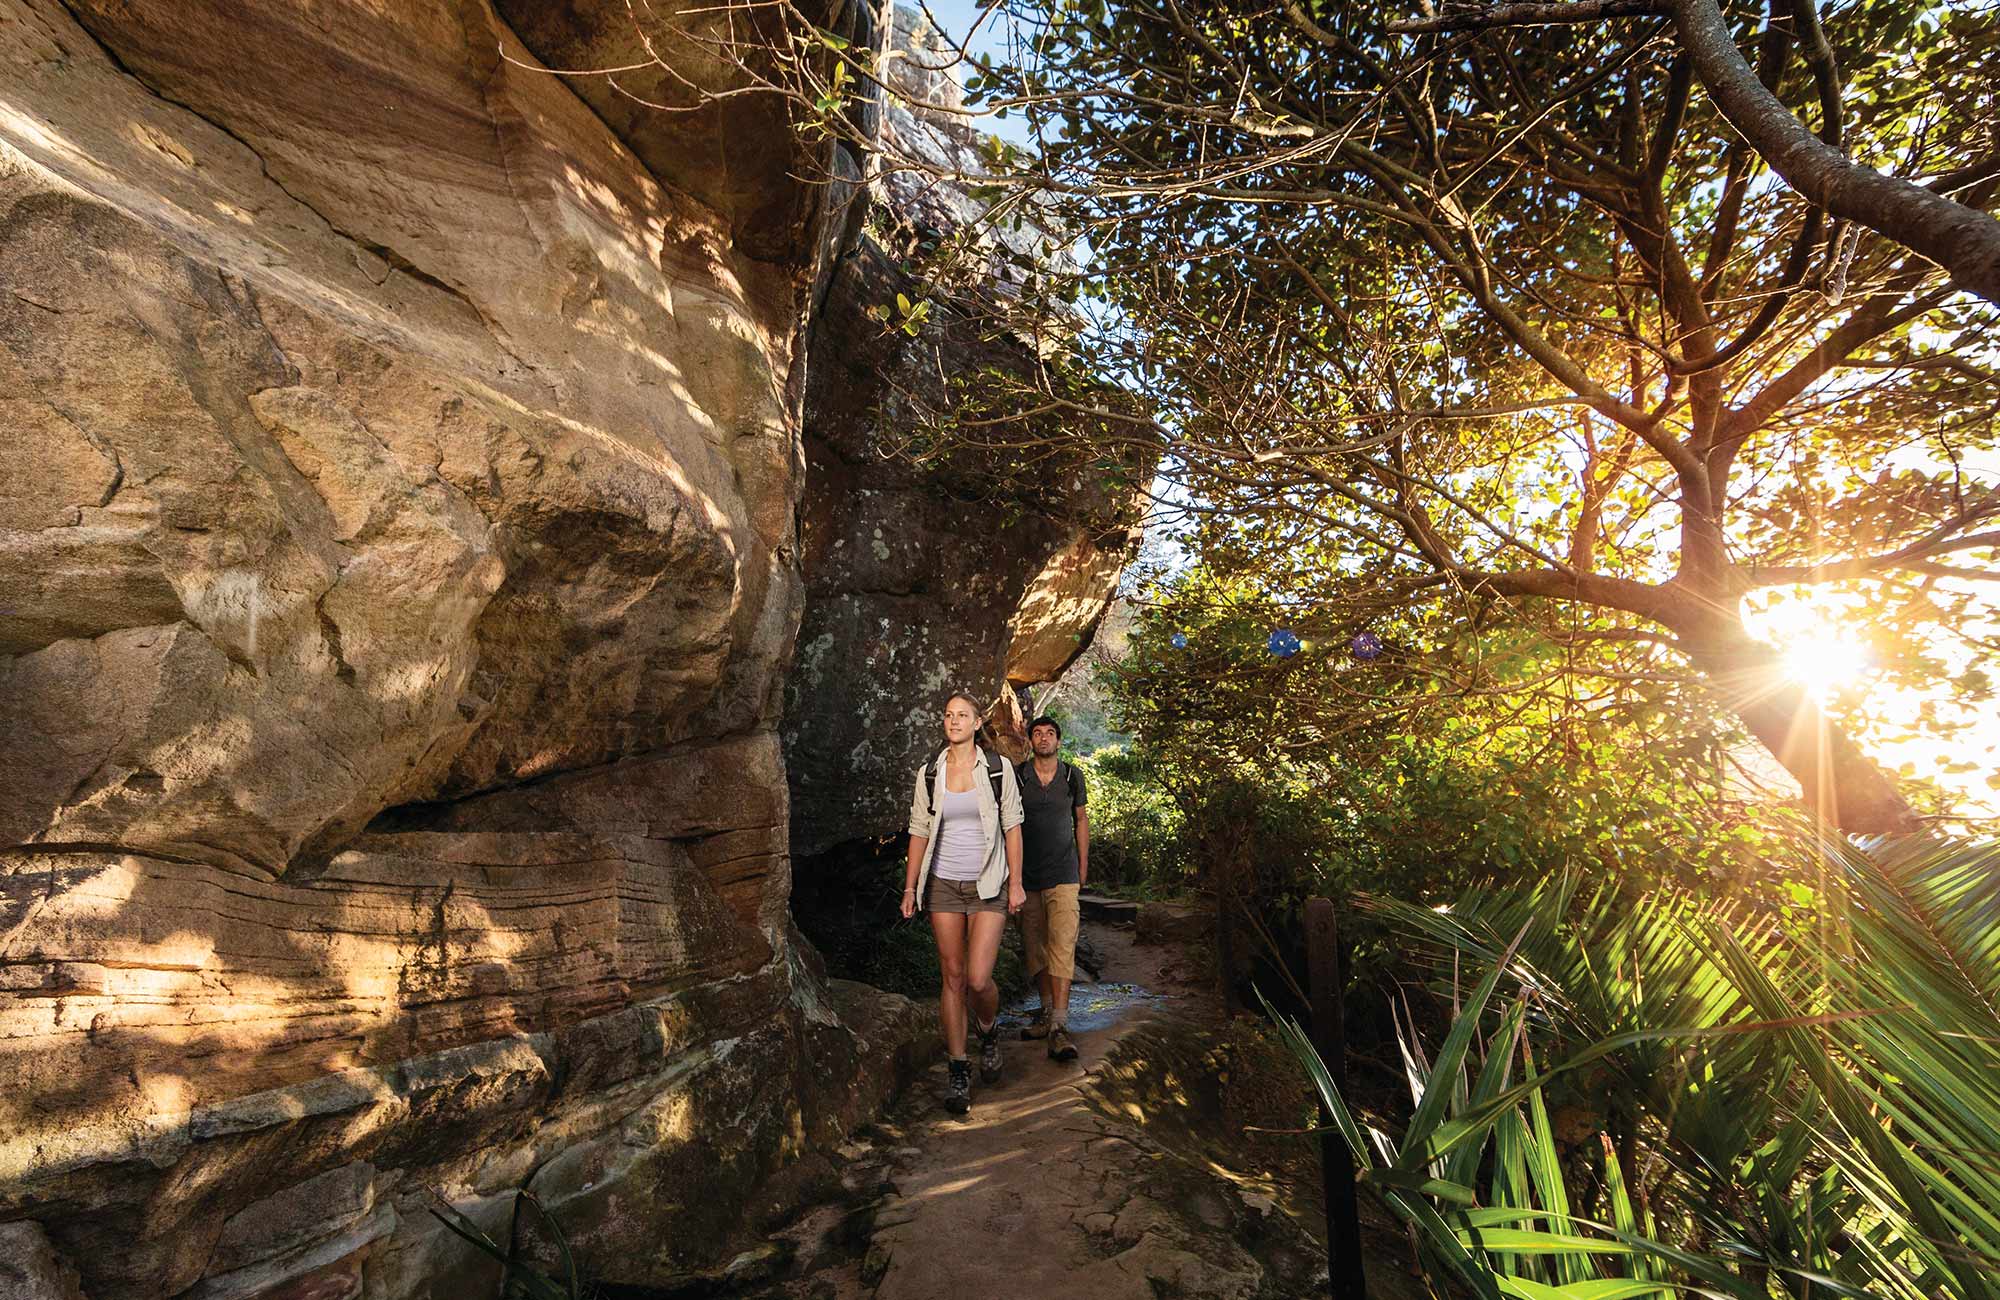 Walkers on Smugglers track, Ku-ring-gai Chase National Park. Photo: D Finnegan/OEH